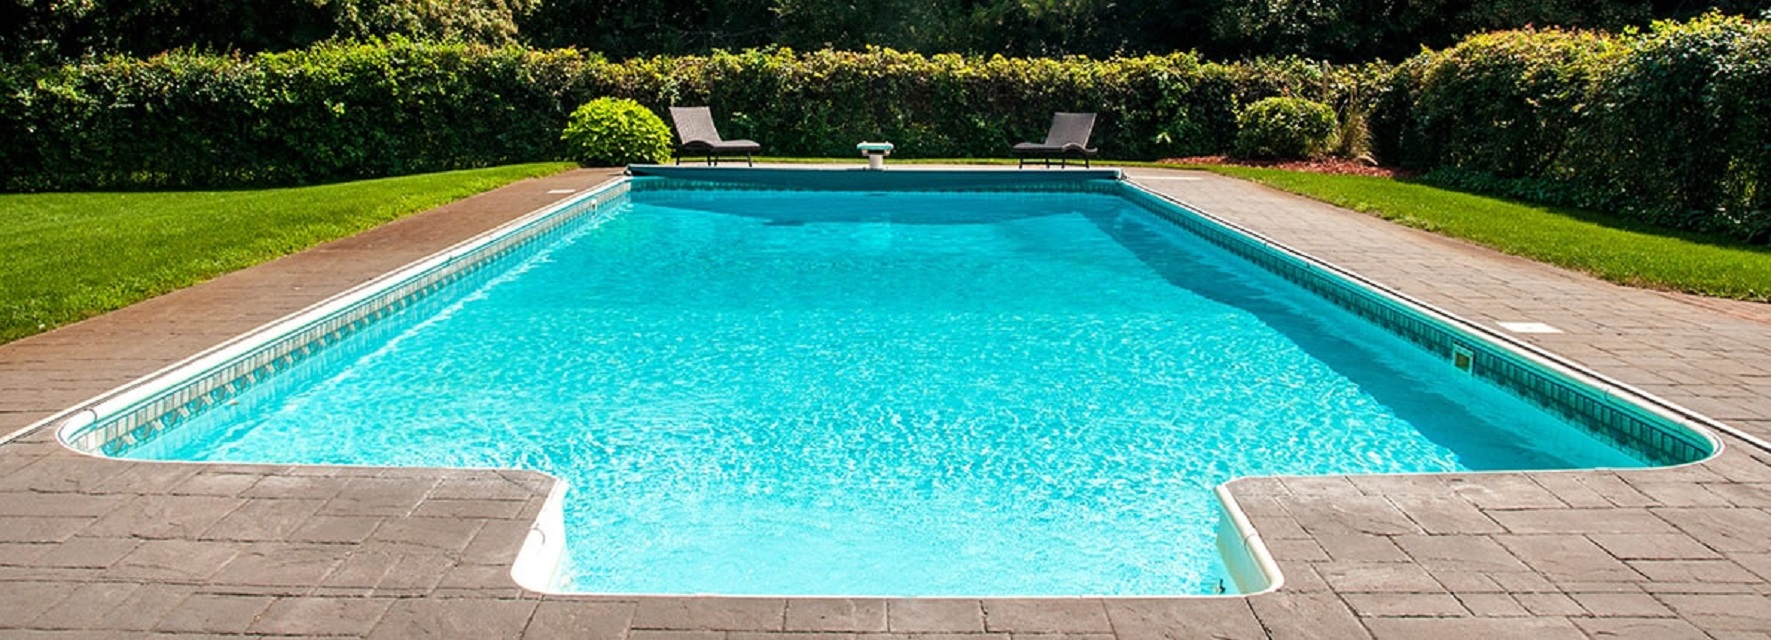 Crystal Clean Pools Inc 8 Railroad Ave, Montvale New Jersey 07645